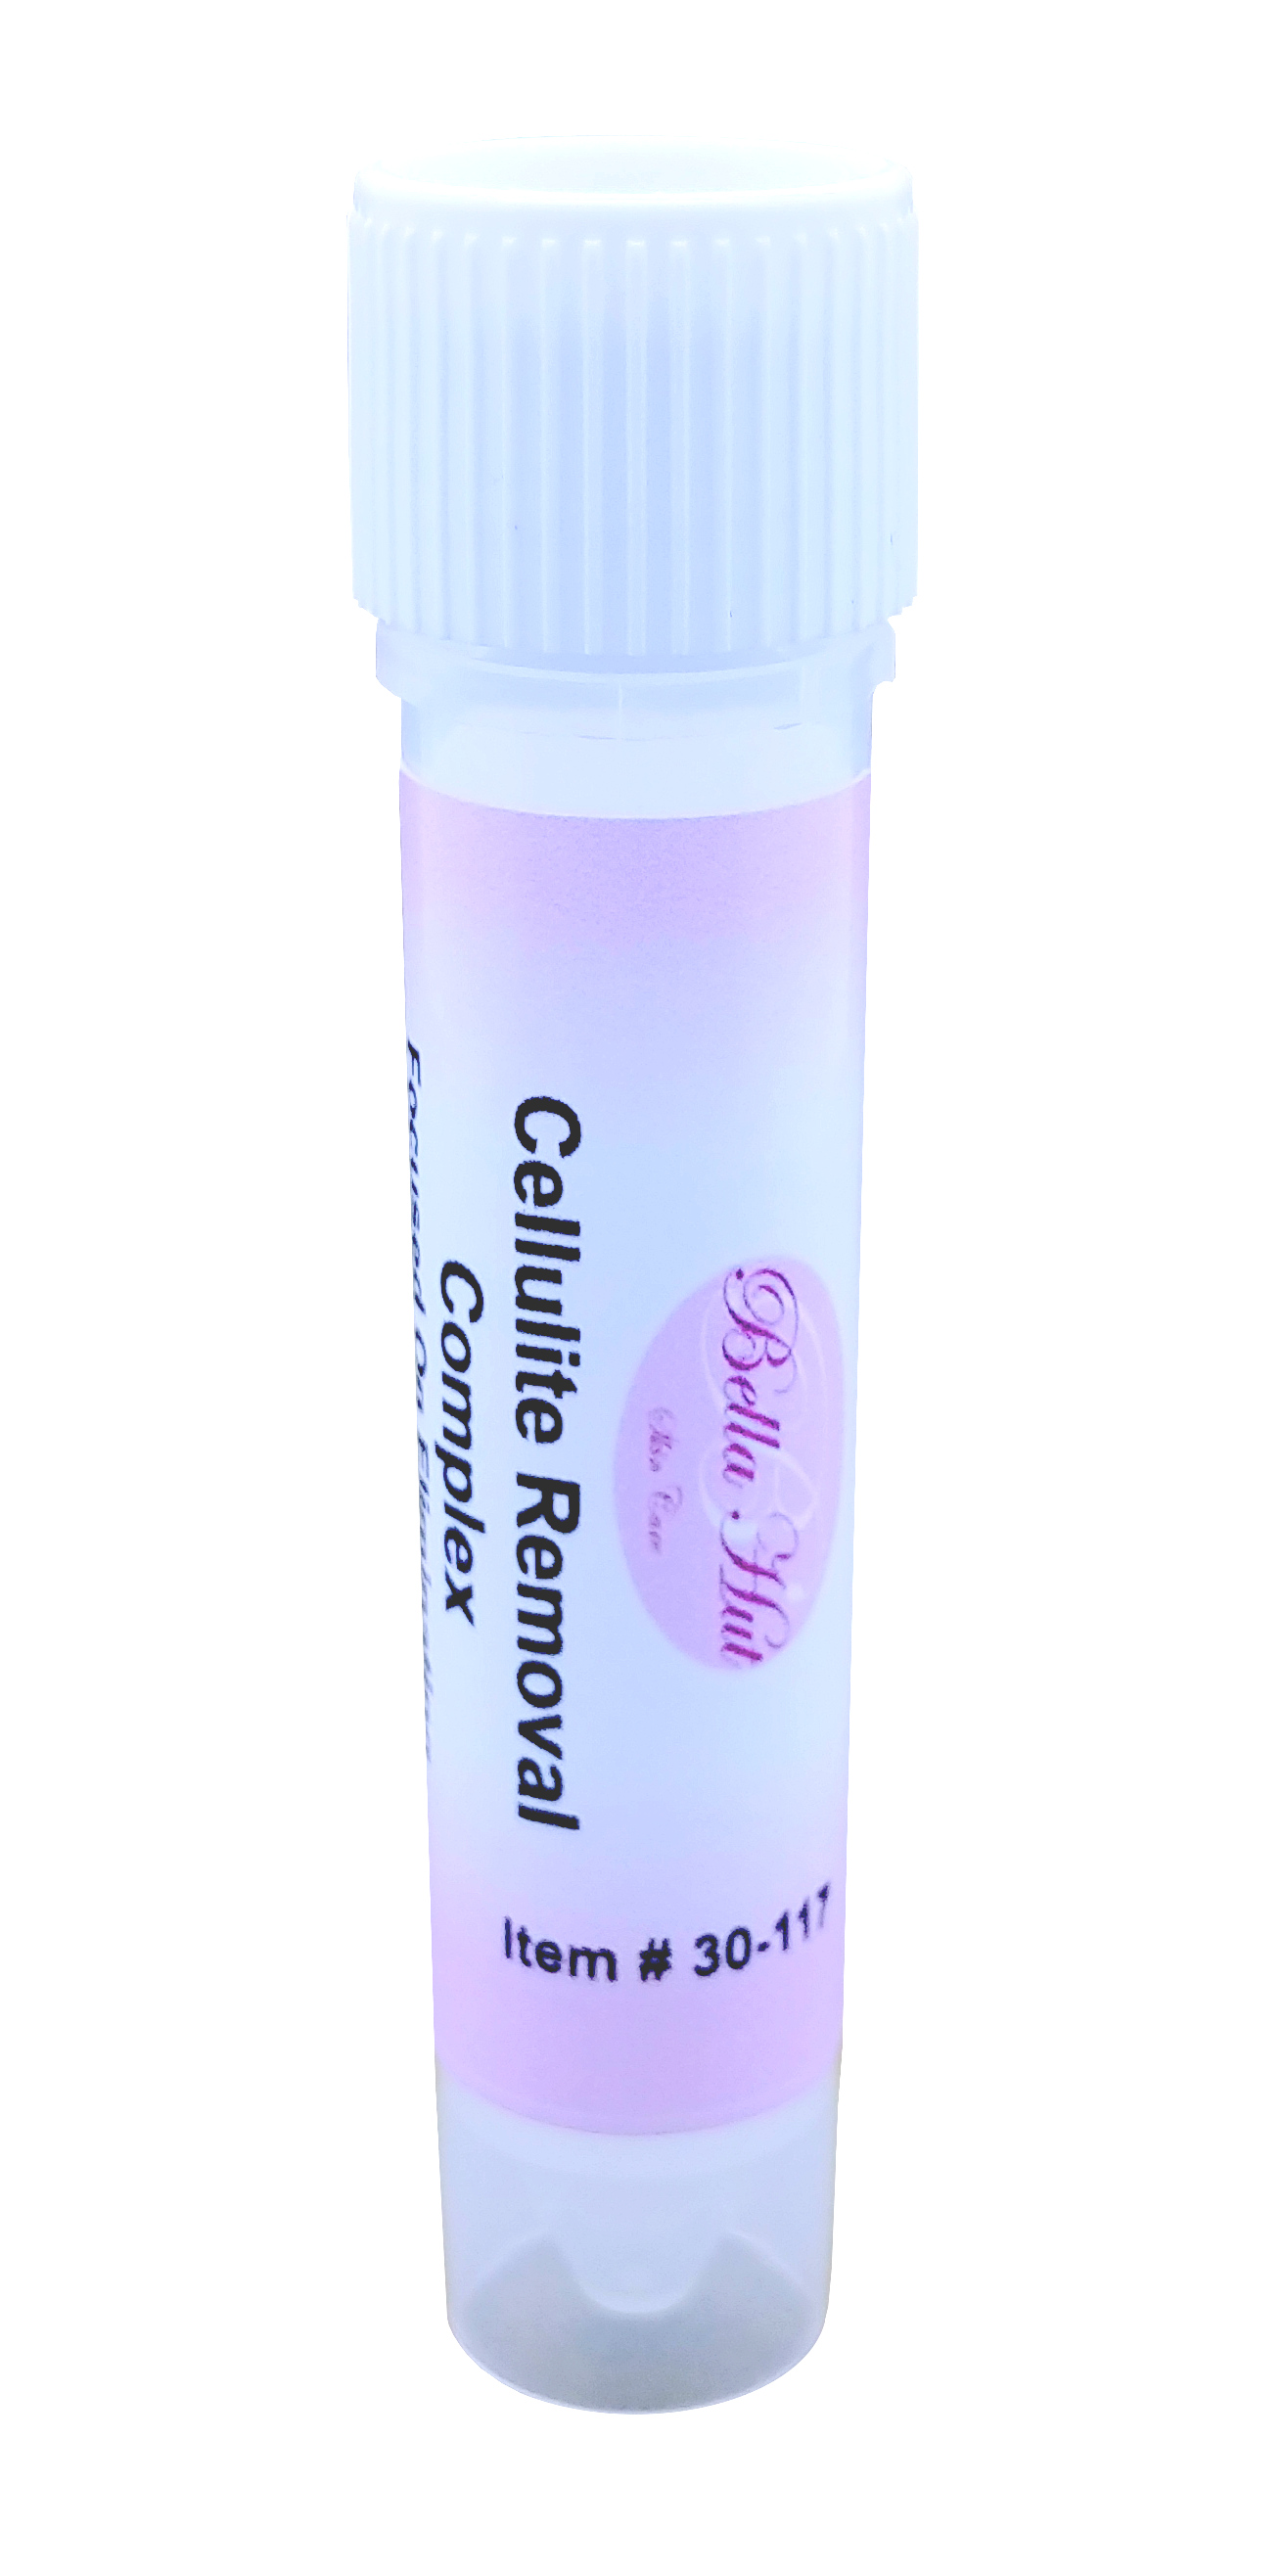 Cellulite removal peptide additive for mixing cream or serum